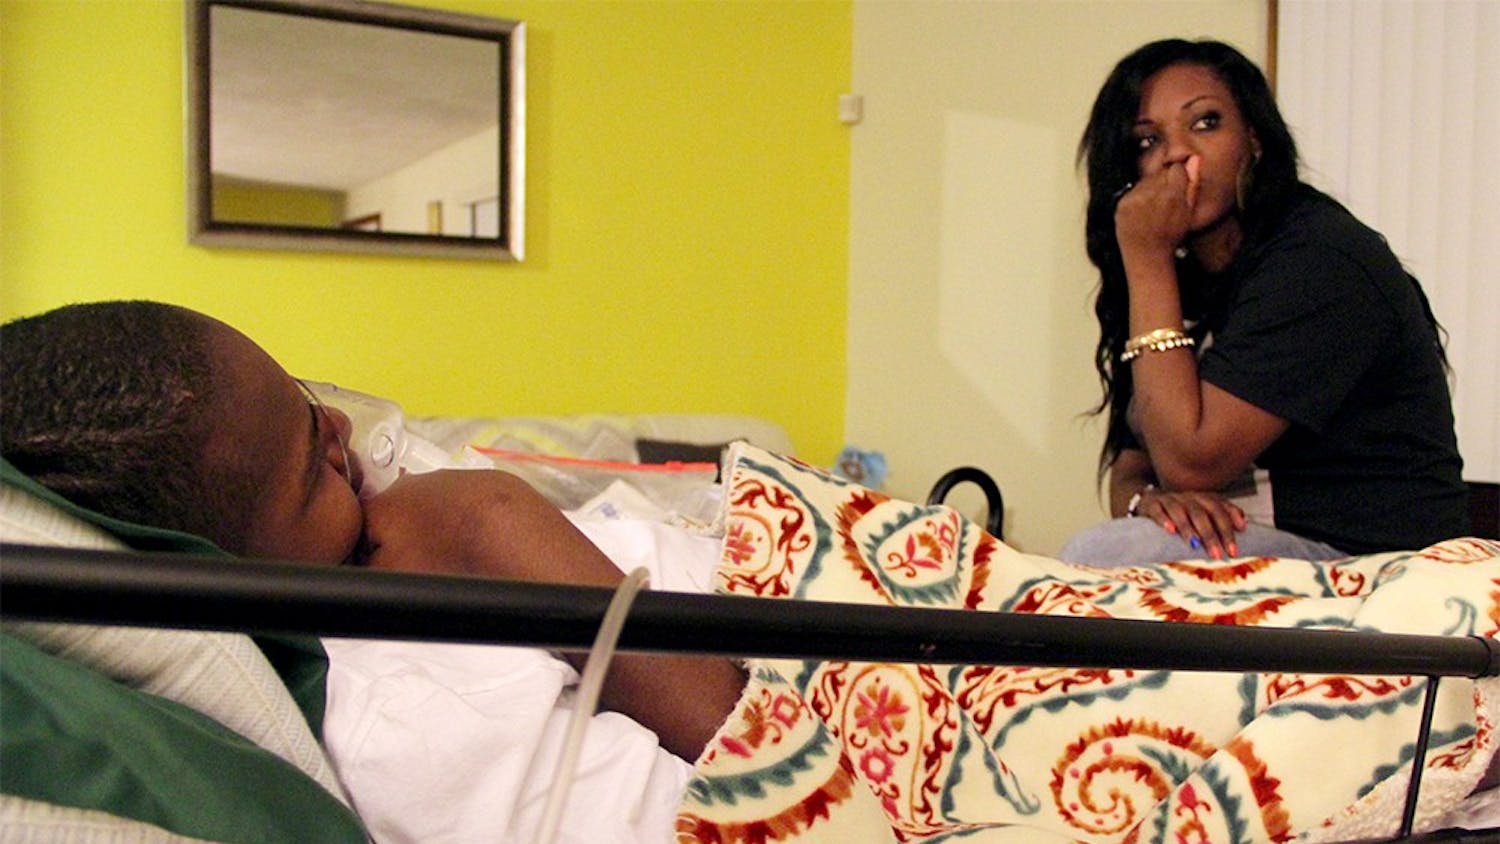 DeAndra Yates sits on her son's hospital bed on Mar. 5 at their home in Indianapolis. Her son, Dre Knox, was shot in the head in 2014 when he was 13 years old. Since then, he hasn't been able to walk ot talk. Over the past two years, DeAndra has become a vocal advocate against gun violence. 